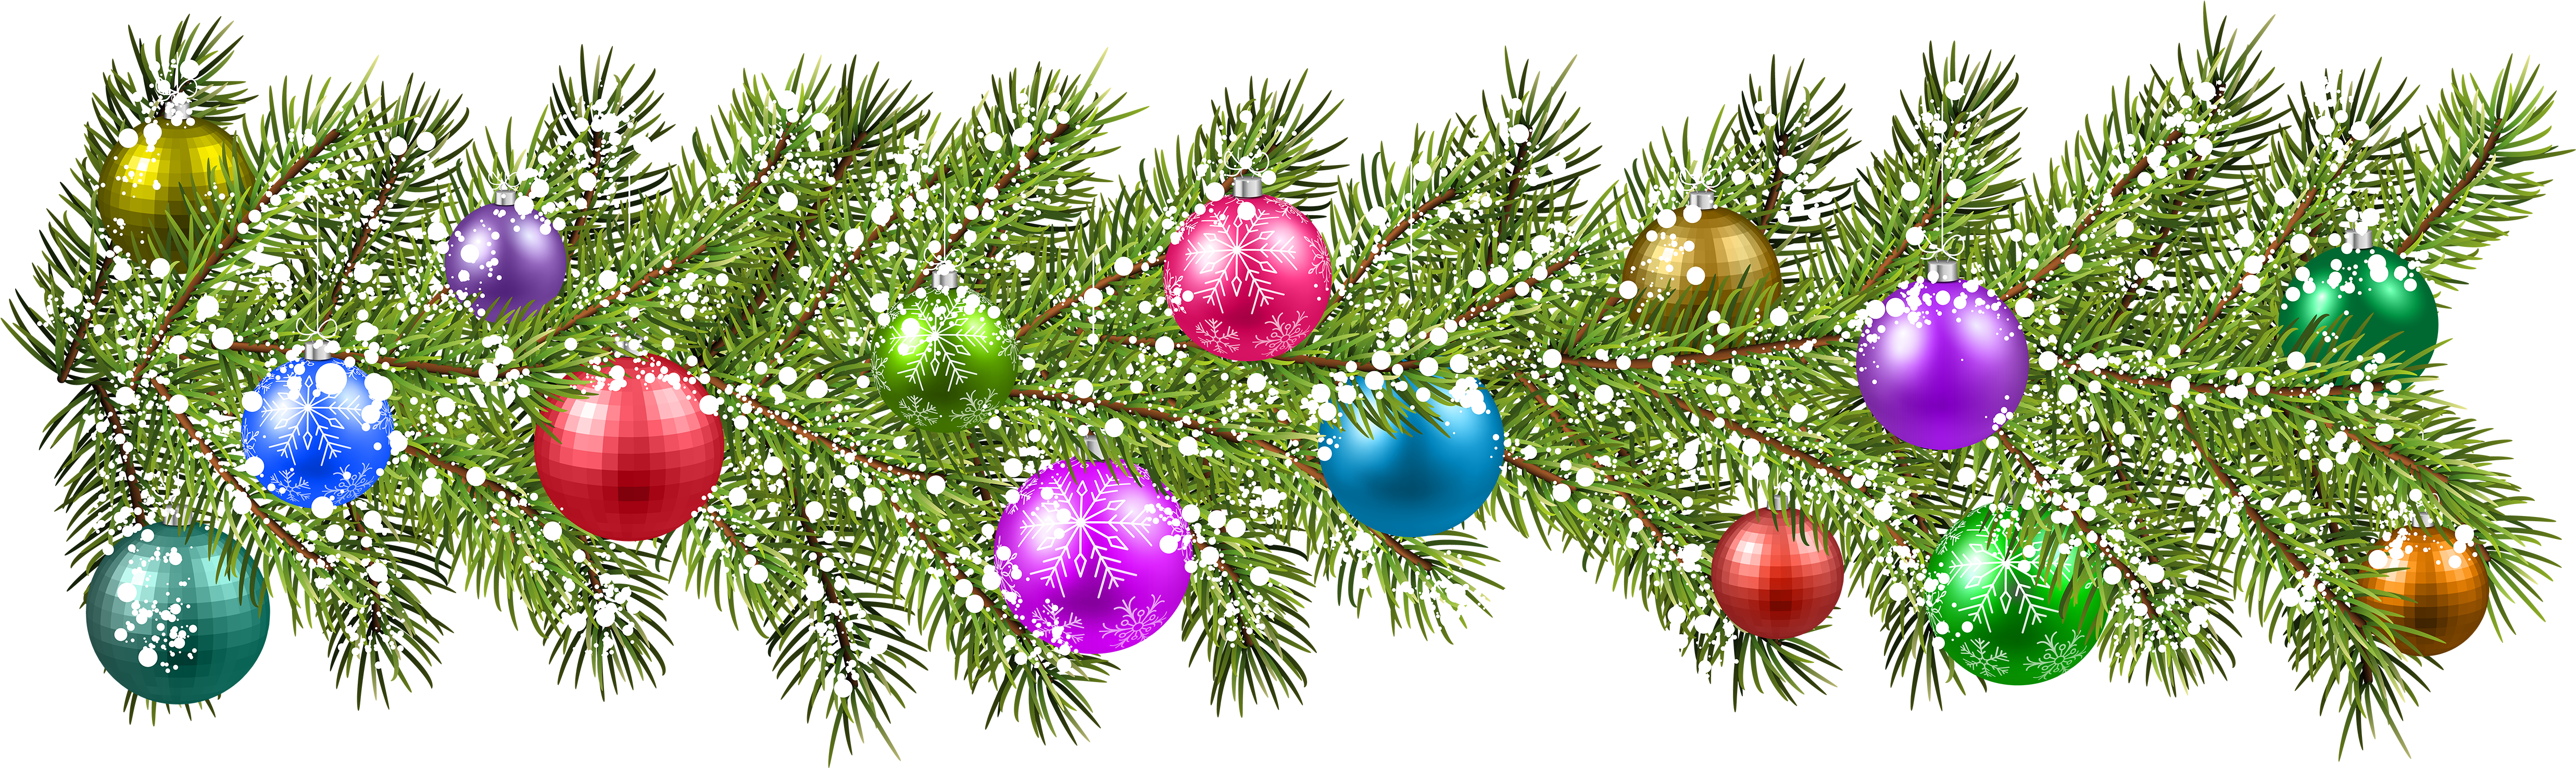 Pine Branch Branches Pine Garland Christmas Clipart.